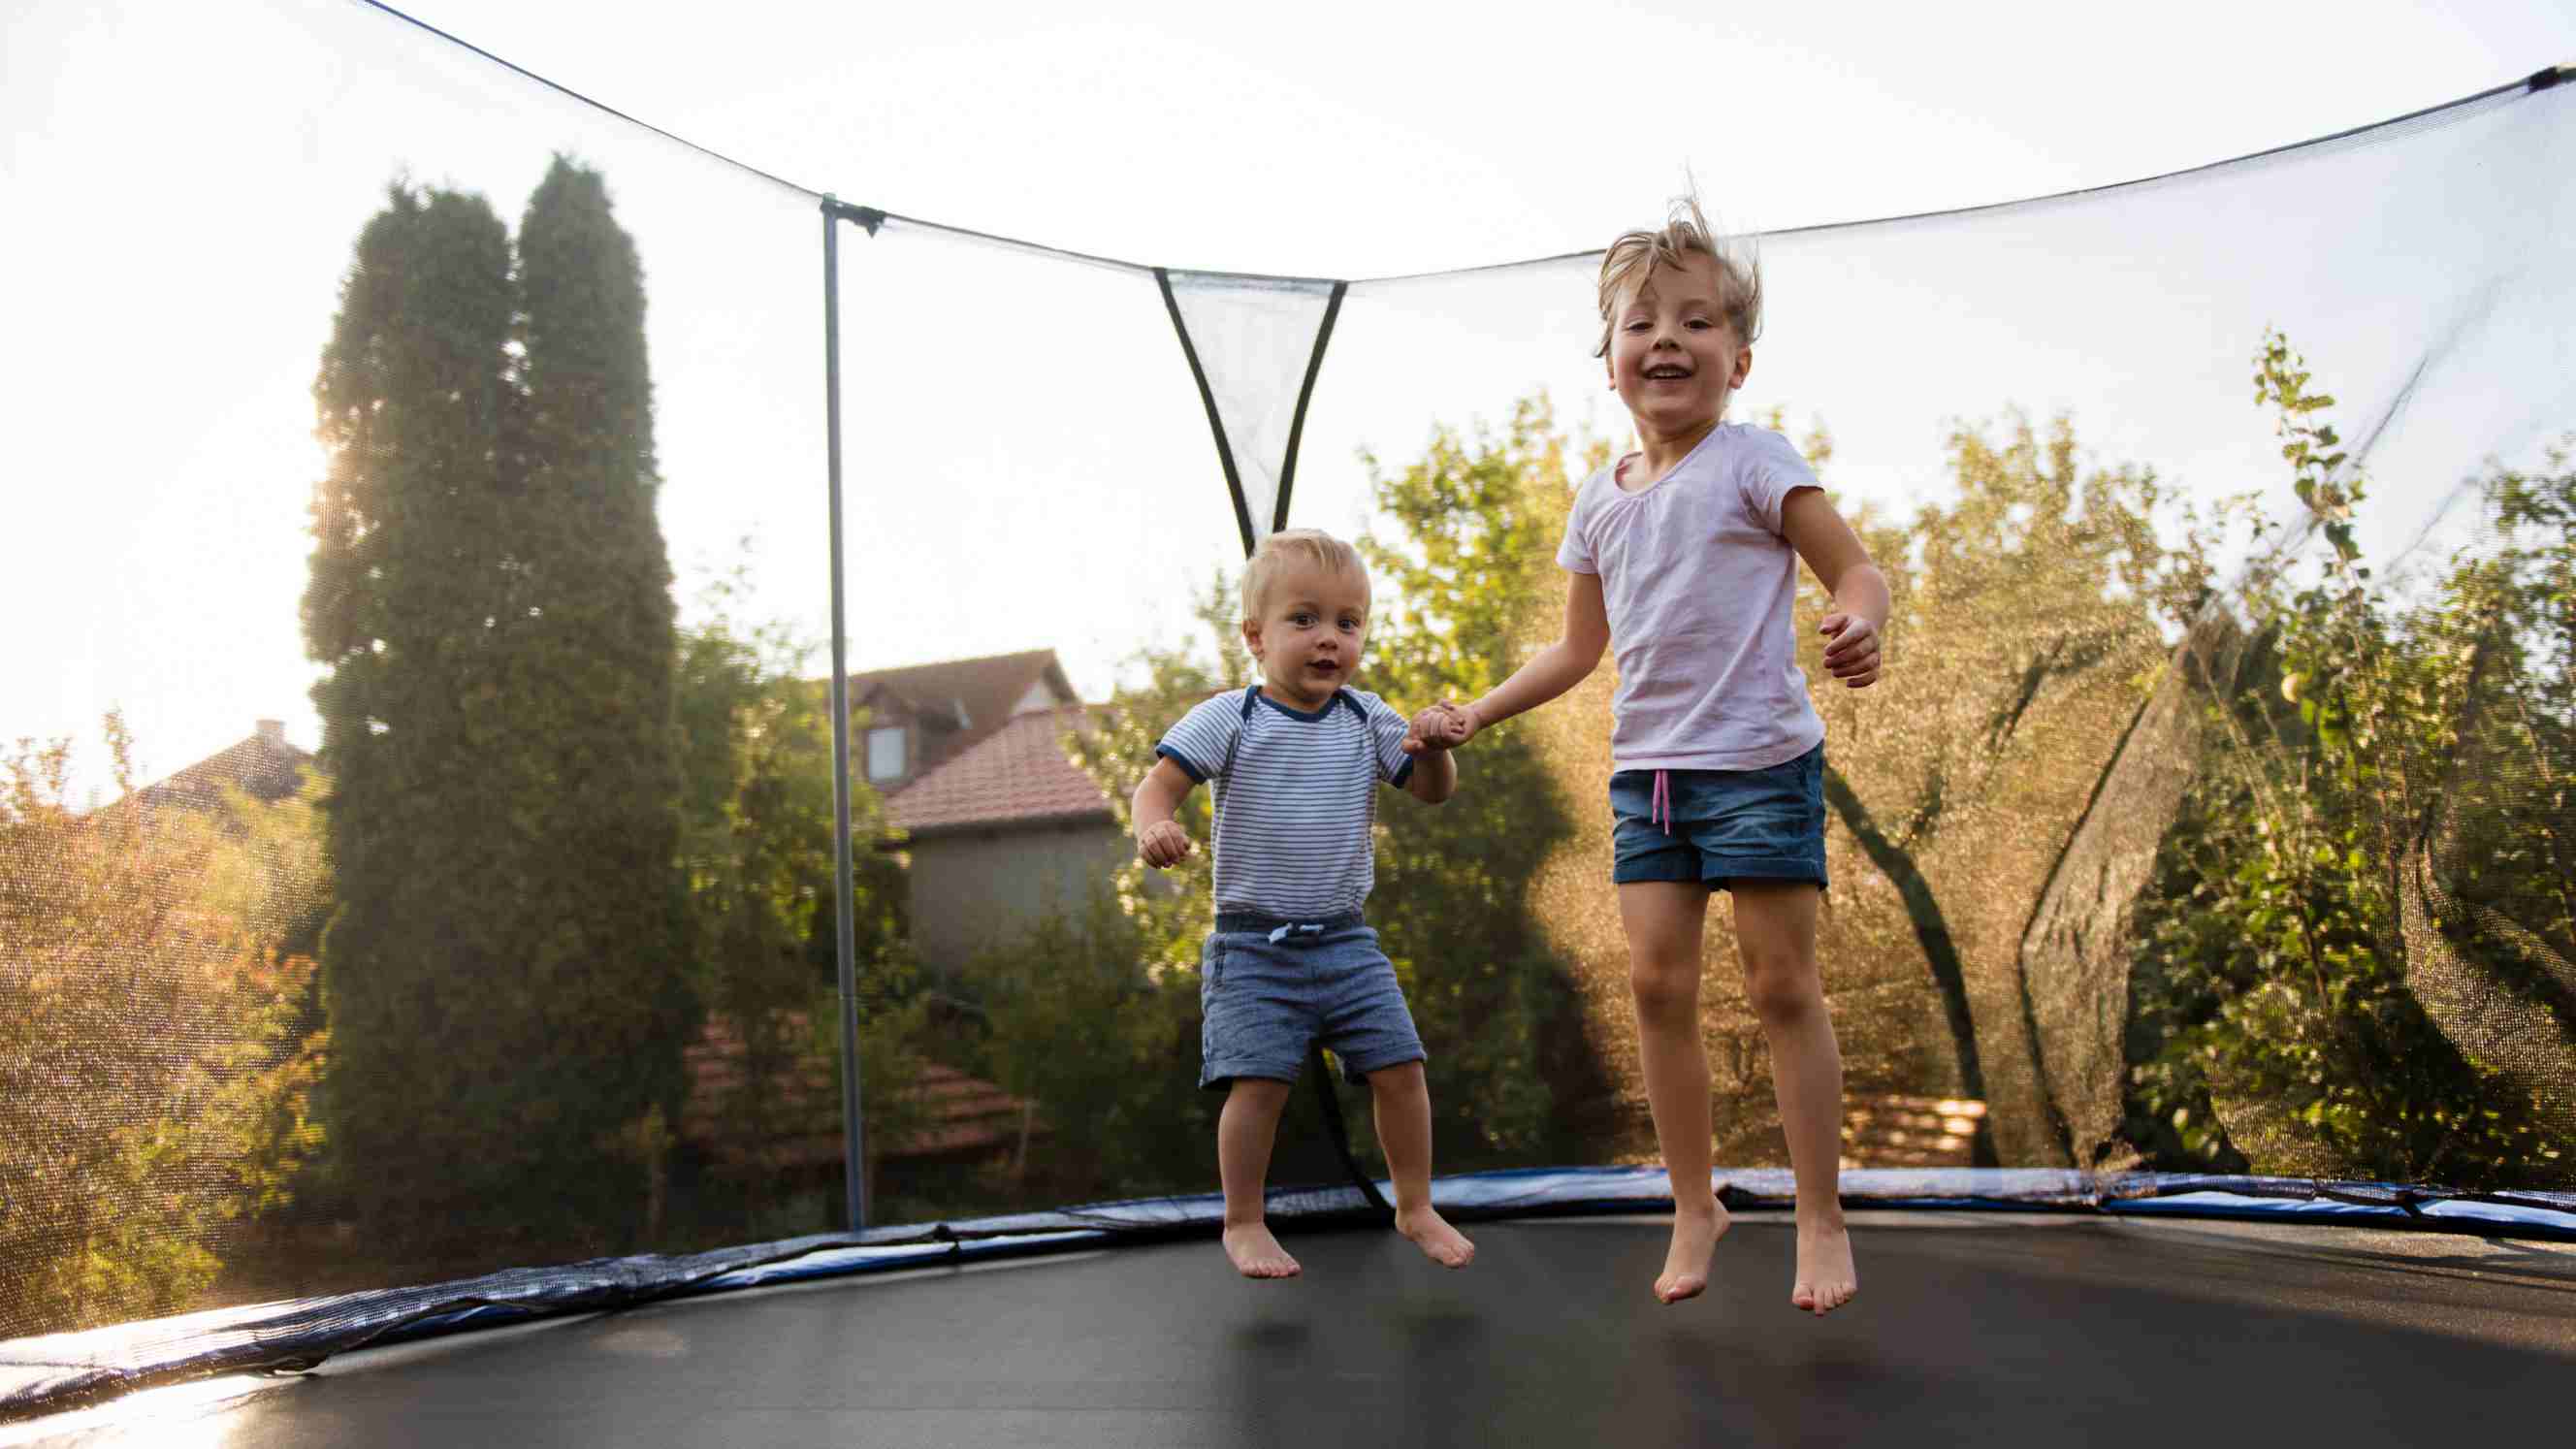 rectangle vs round trampoline: siblings having fun as they jump on trampoline